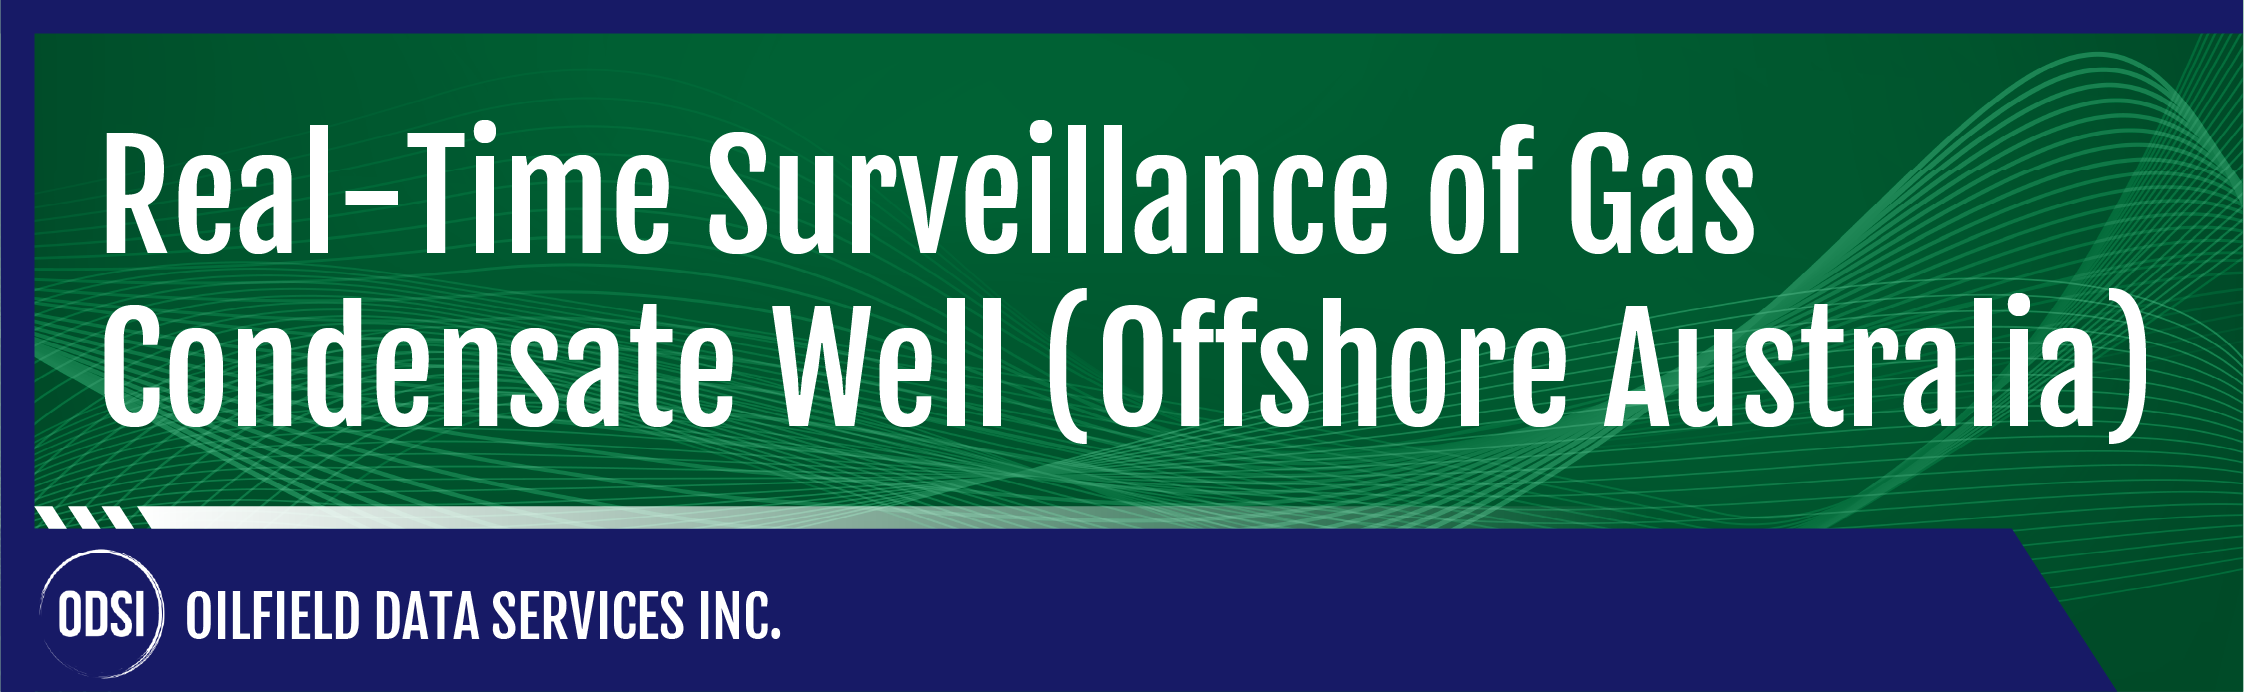 Real-Time Surveillance of Gas Condensate Well (Offshore Australia)